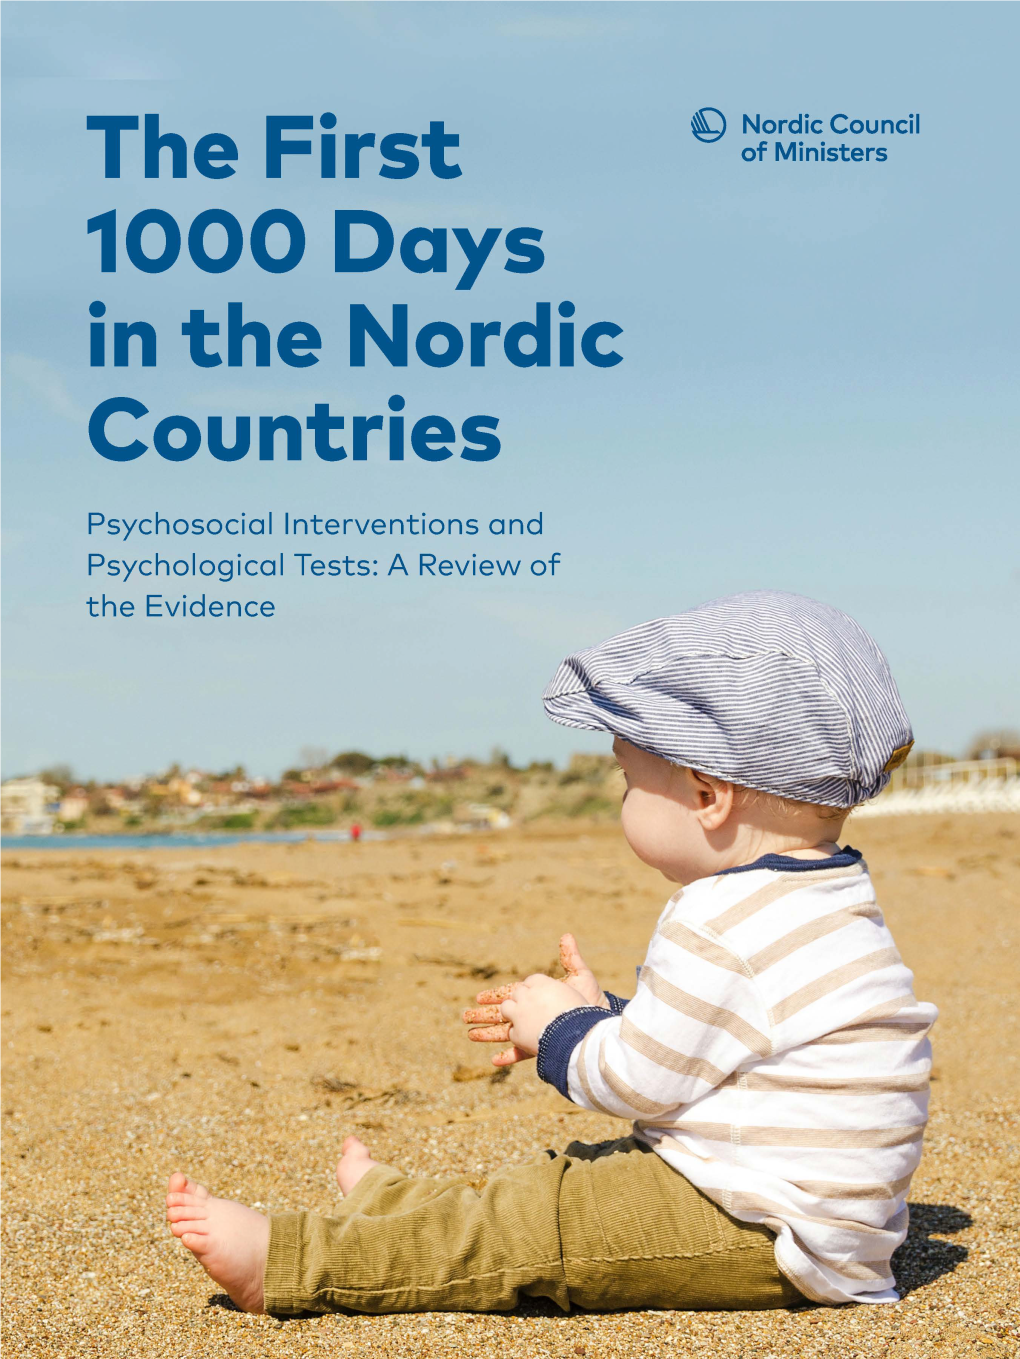 The First 1000 Days in the Nordic Countries Psychosocial Interventions and Psychological Tests: a Review of the Evidence